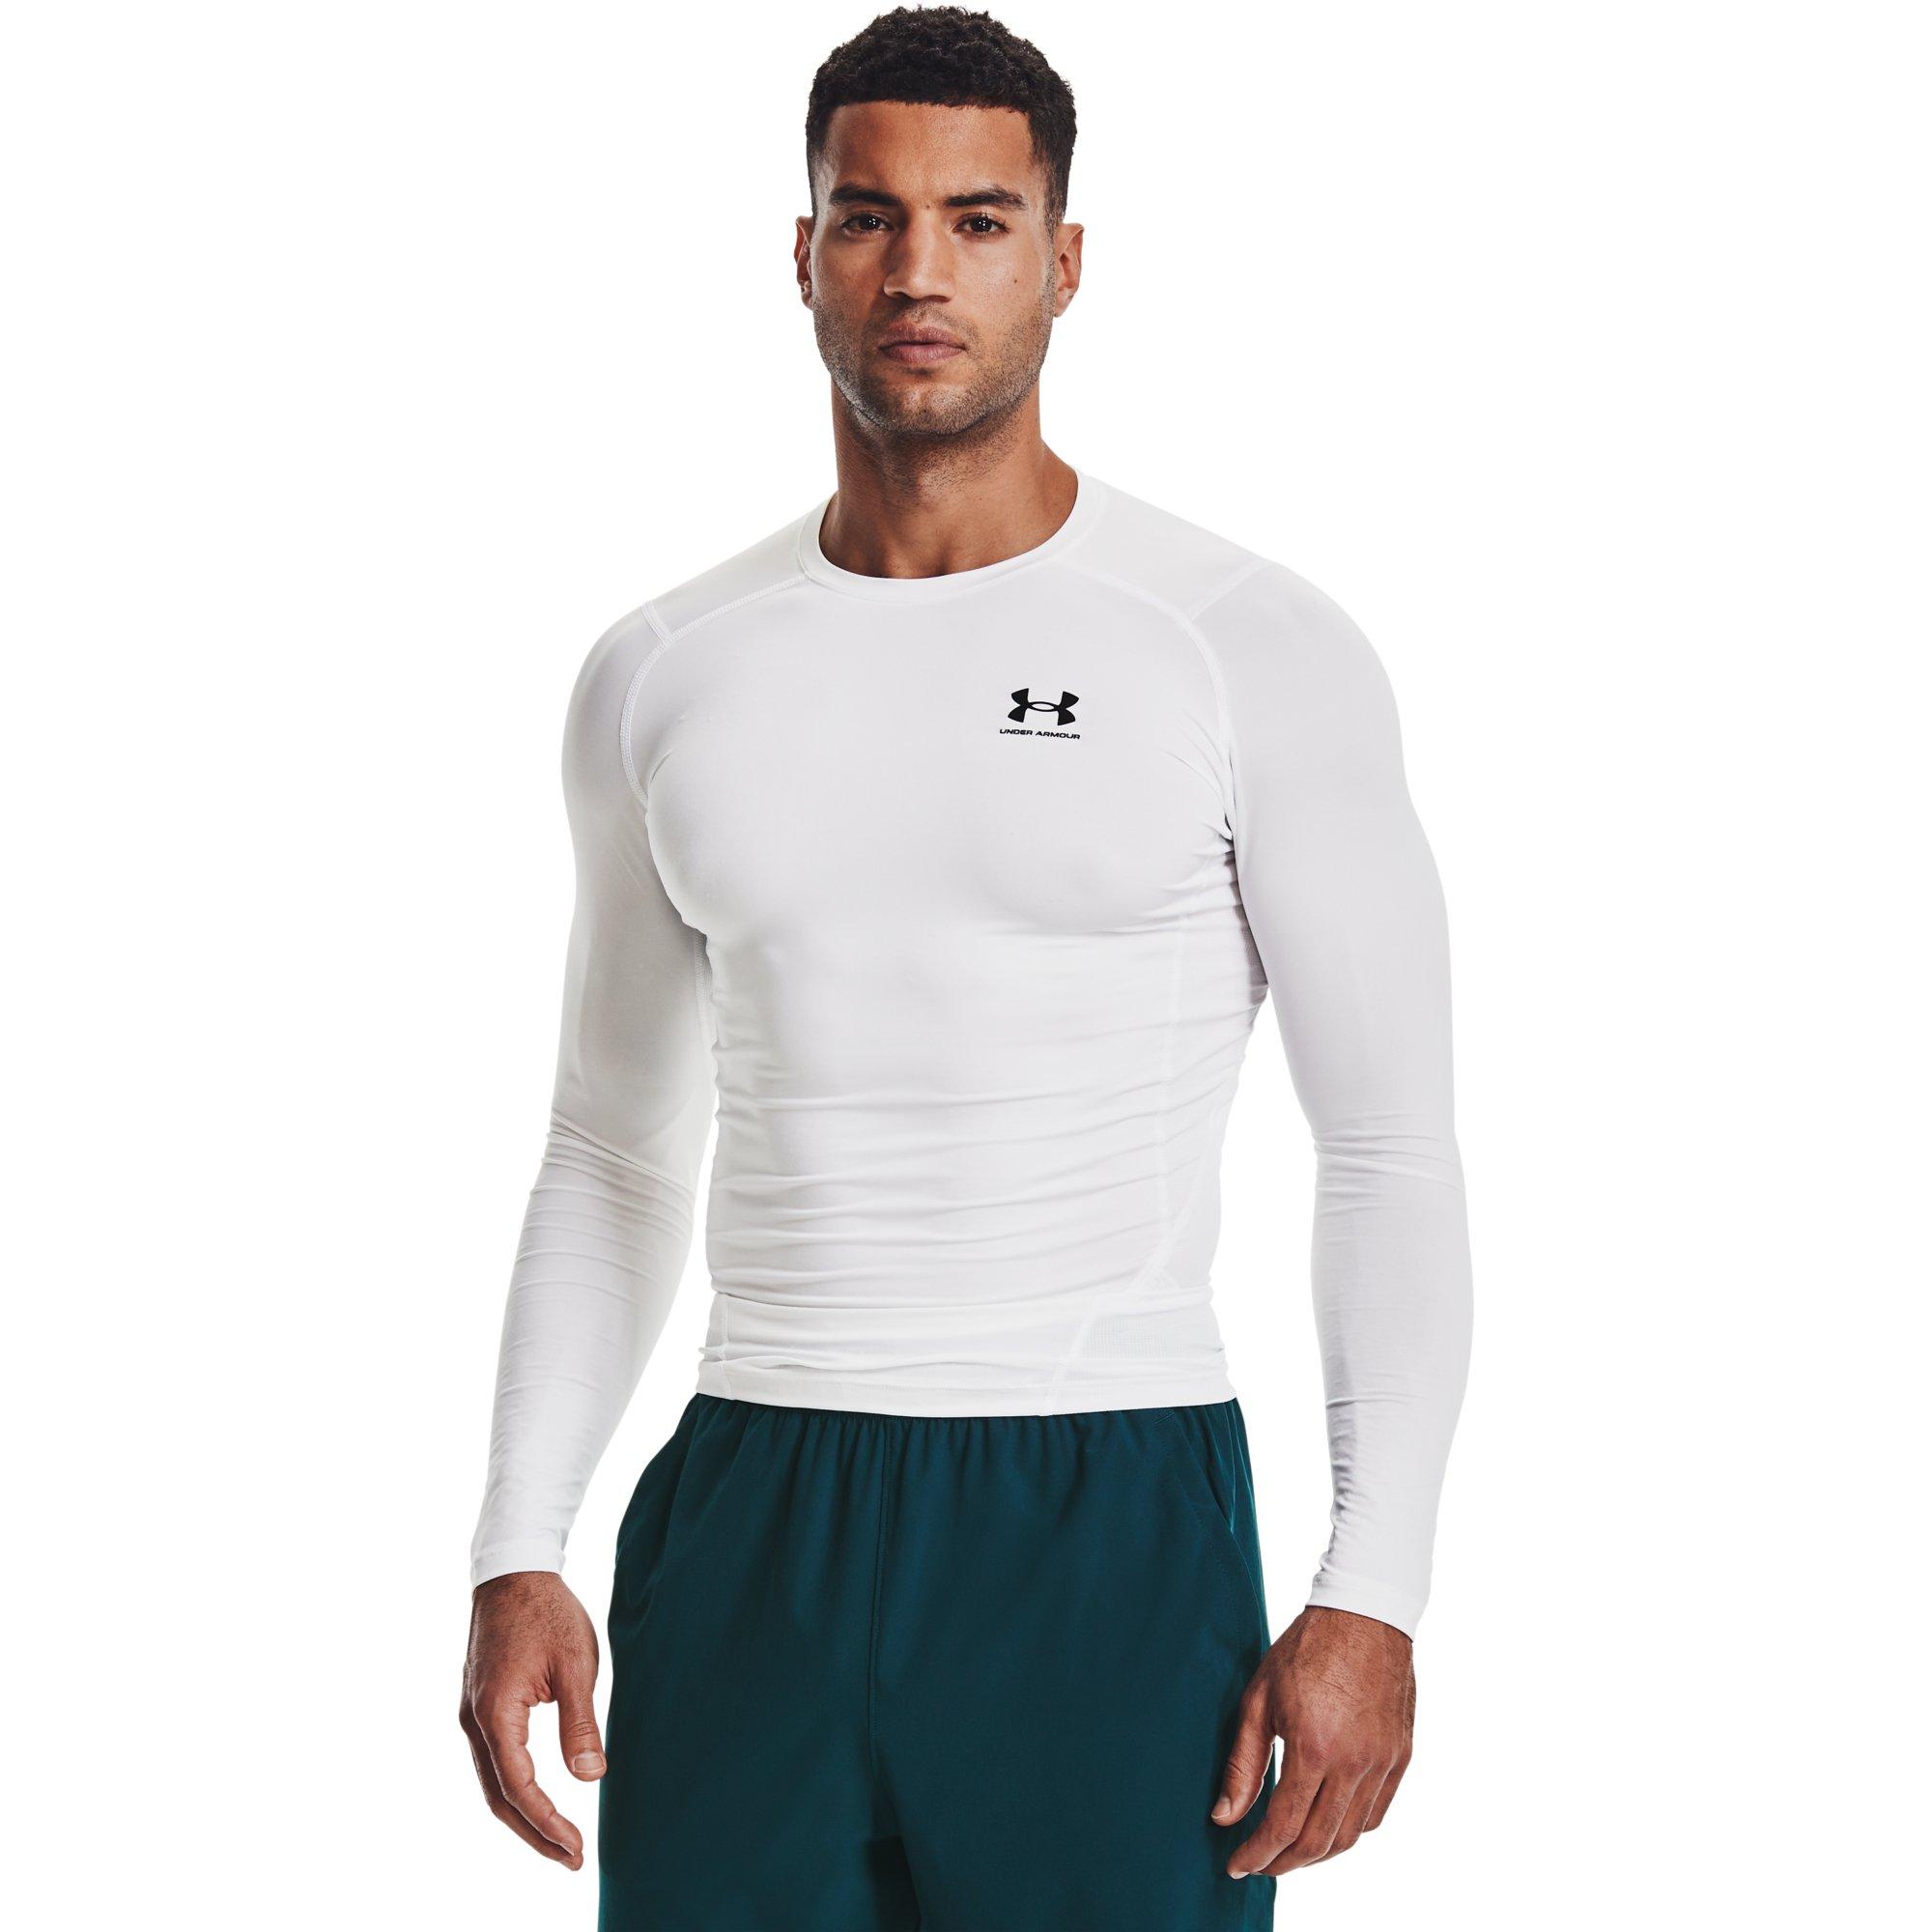 Under Armour UA HeatGear Long Sleeved Sports Functional Compression Top